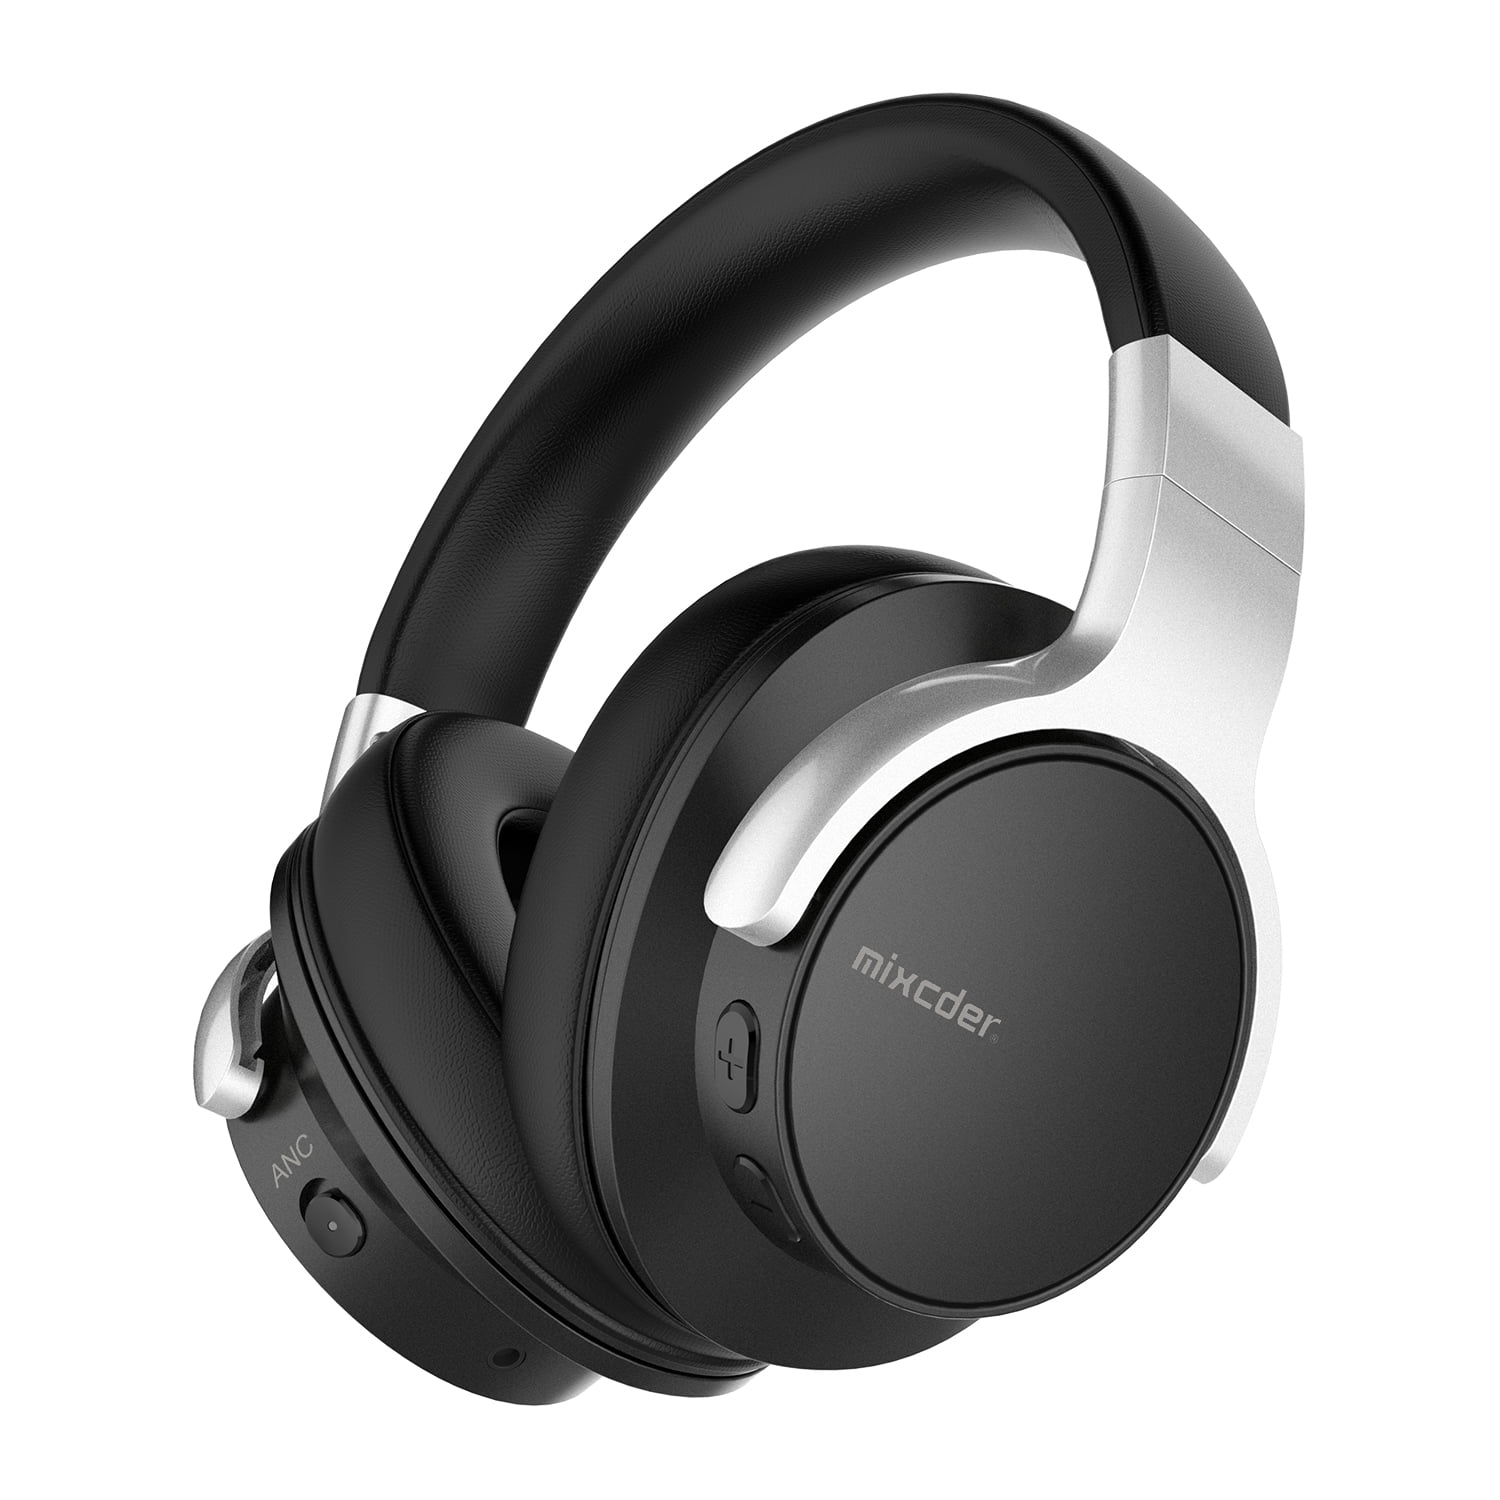 Mixcder E7 Noise-Cancelling Bluetooth Headphones with Mic